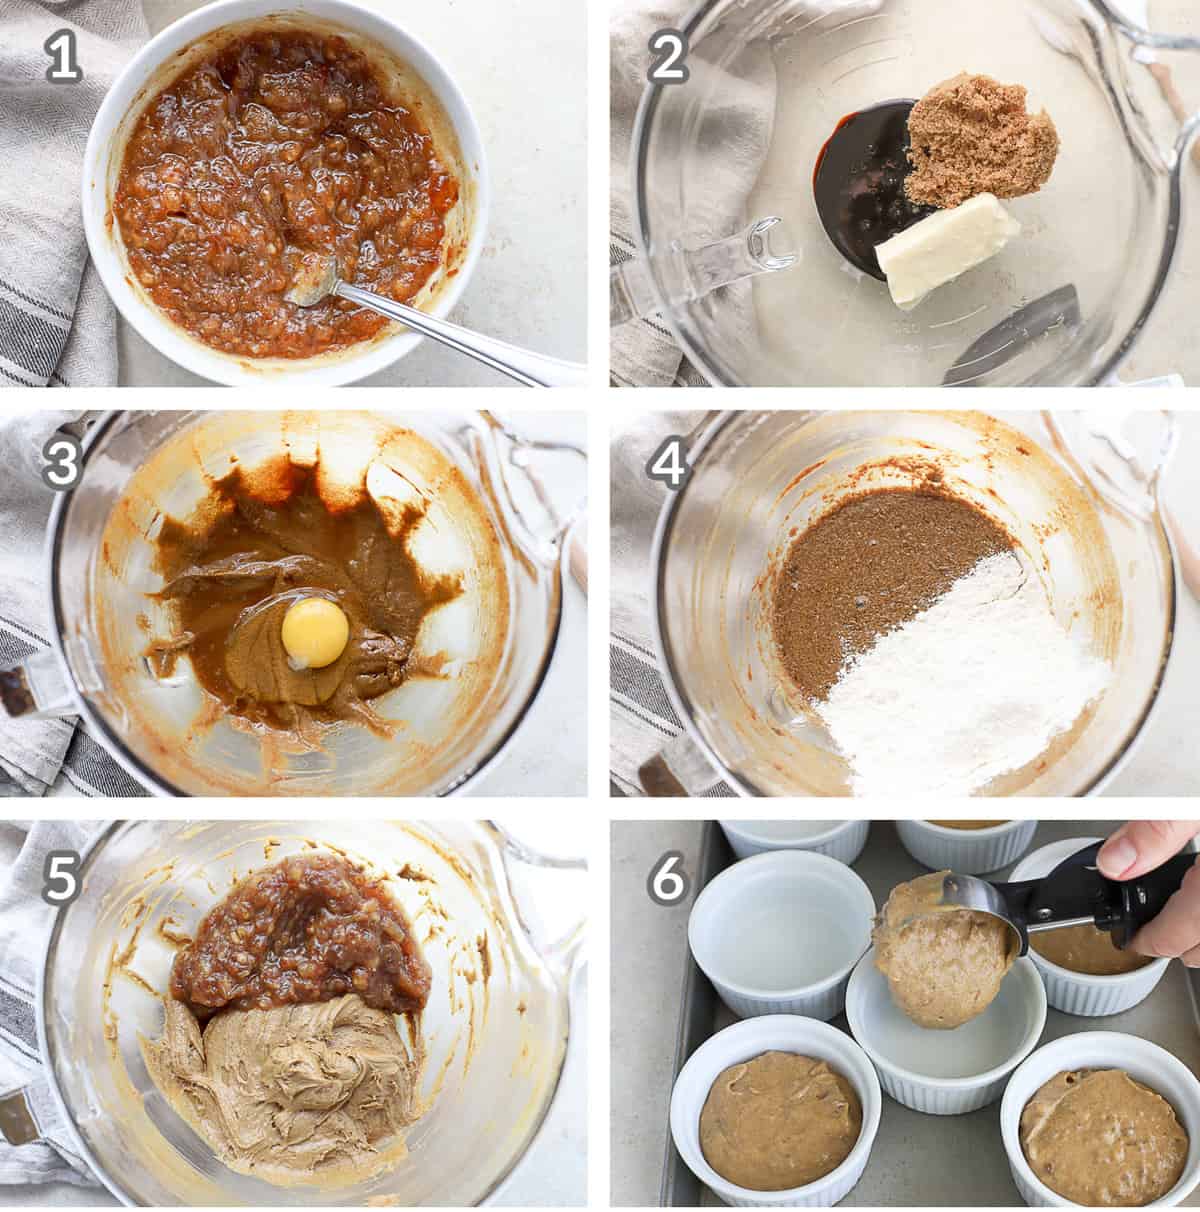 Step by step photos to make sticky toffee pudding.